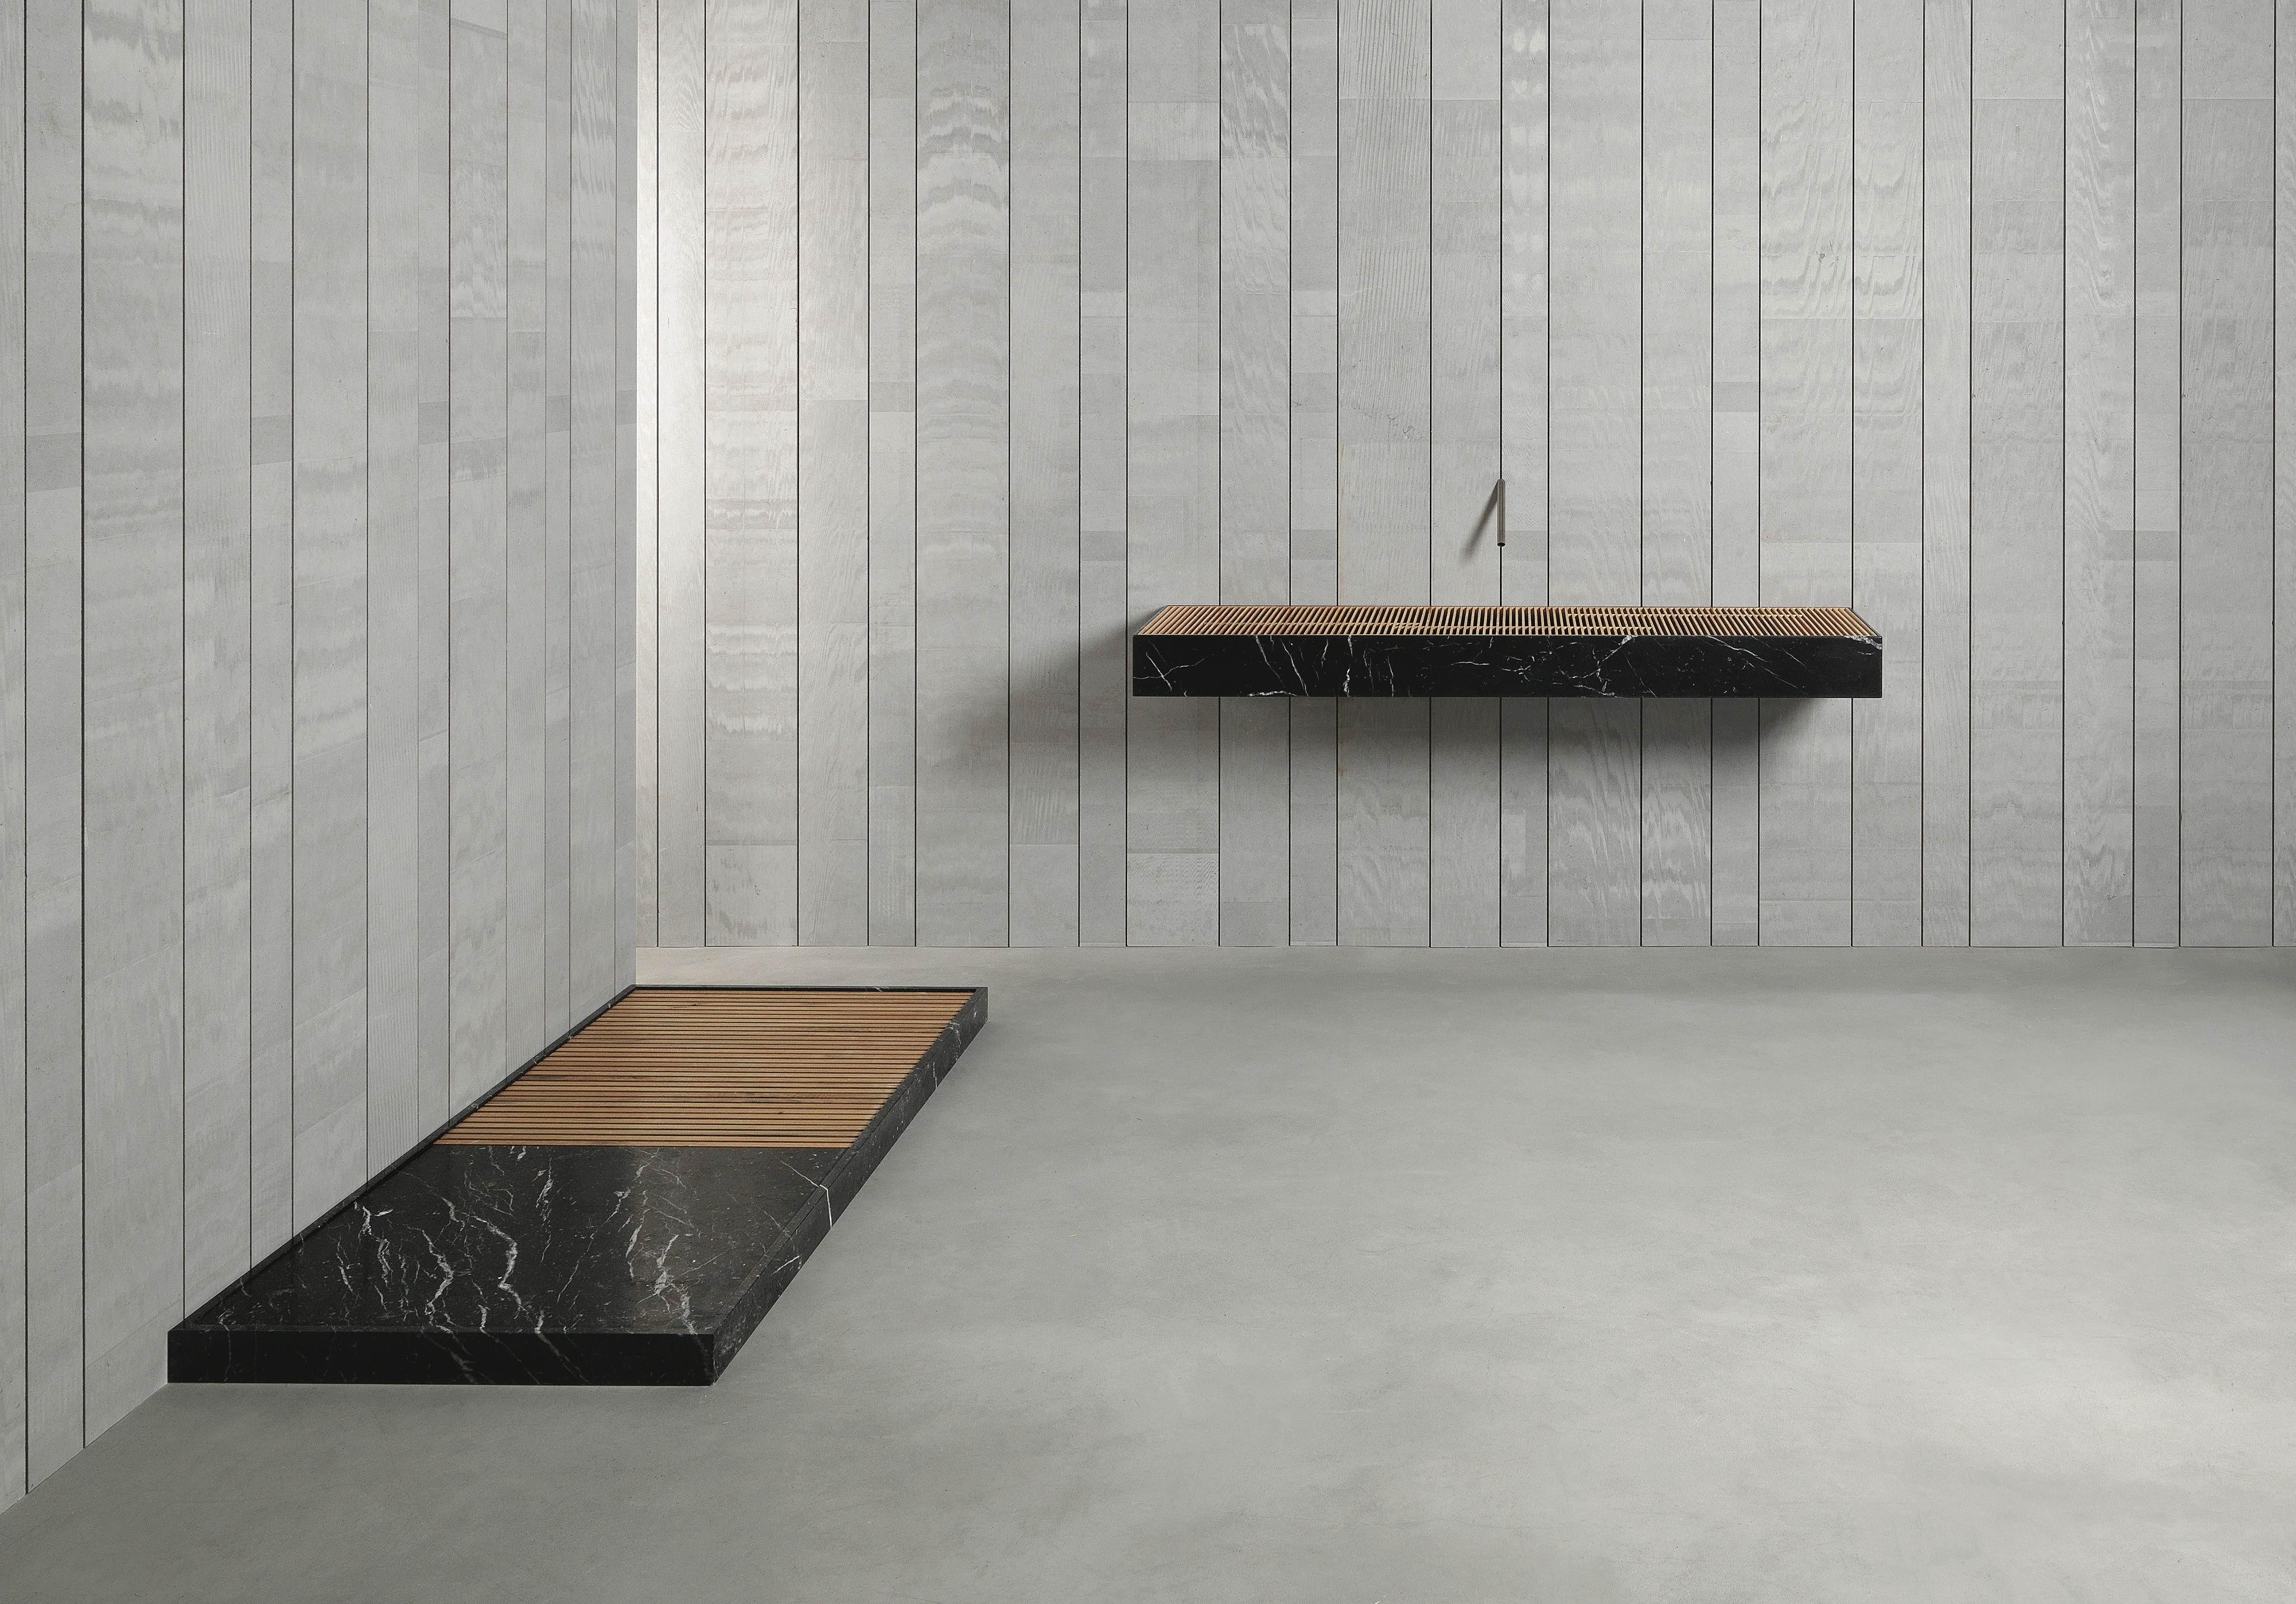 Part of the Piano di Posa collection designed by Vittorio Longheu, Cambiaro is carved shower tray in Nero marquinea marble with footboard in natural oak wood. Dimension and material are customizable.
“Creativity hallmarked by nature” is the axiom